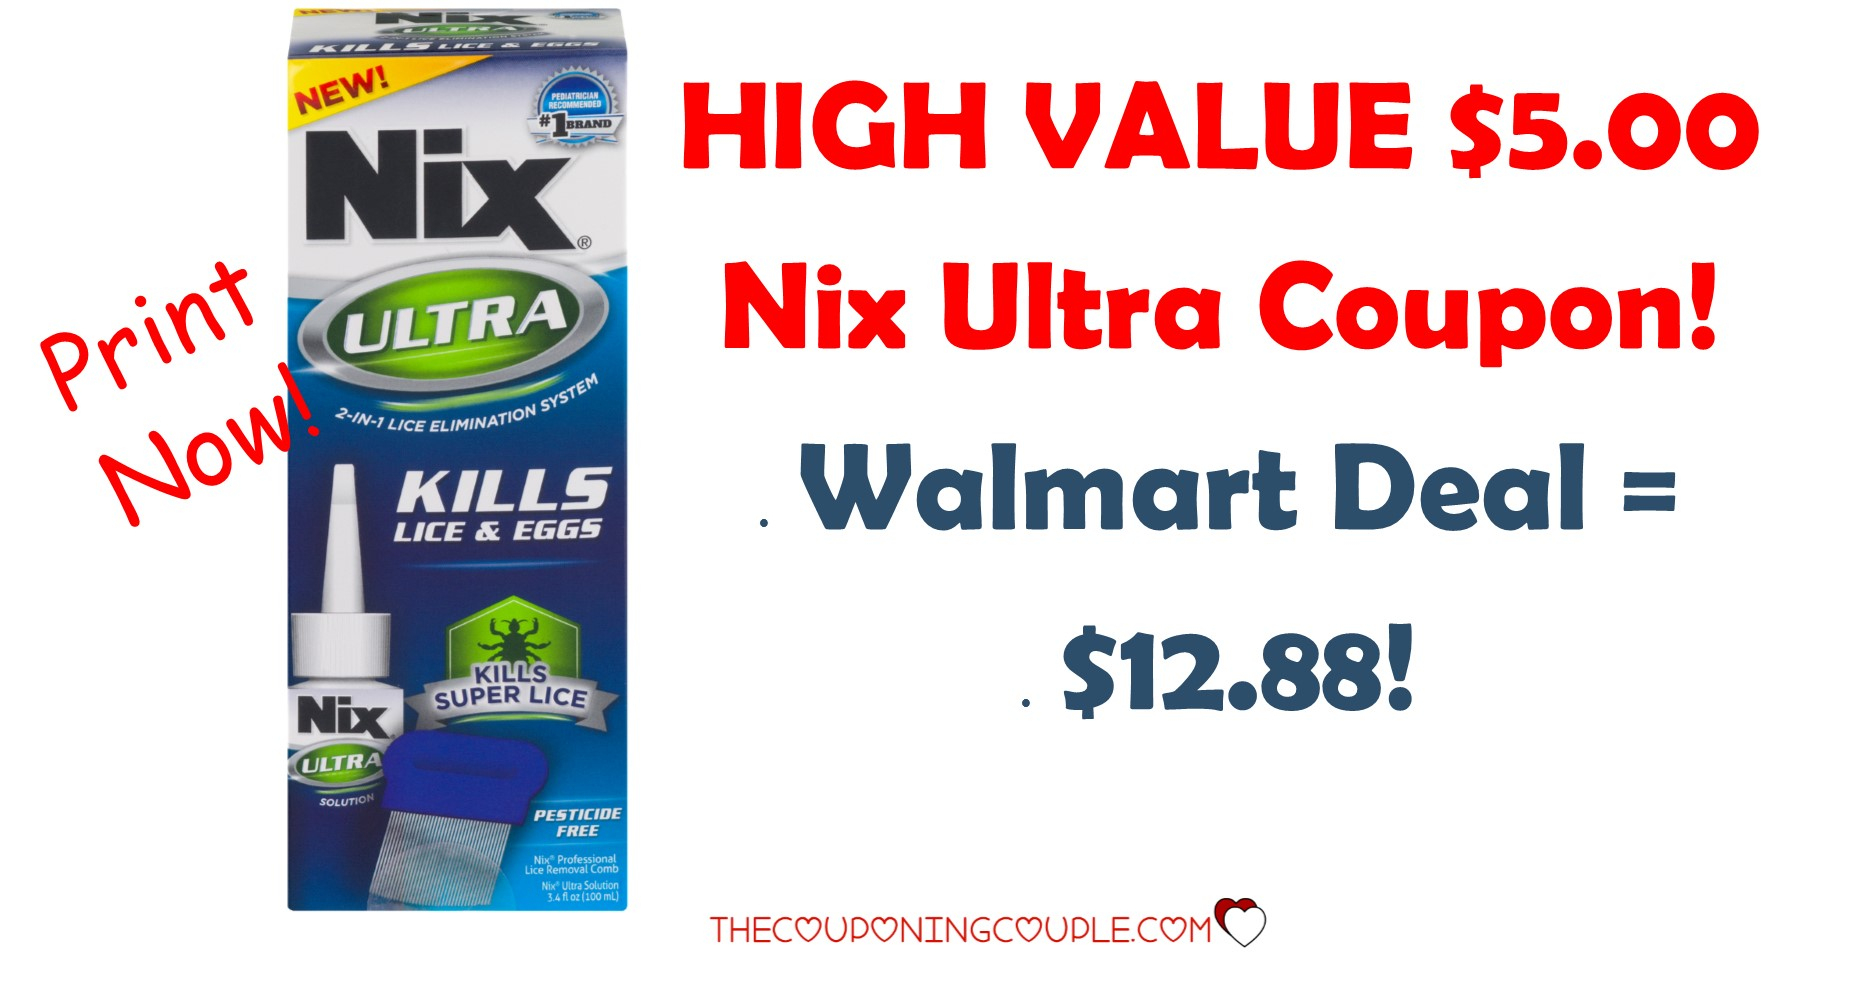 $5.00 Nix Ultra High Value Coupon + Walmart Deal! - Free High Value Printable Coupons